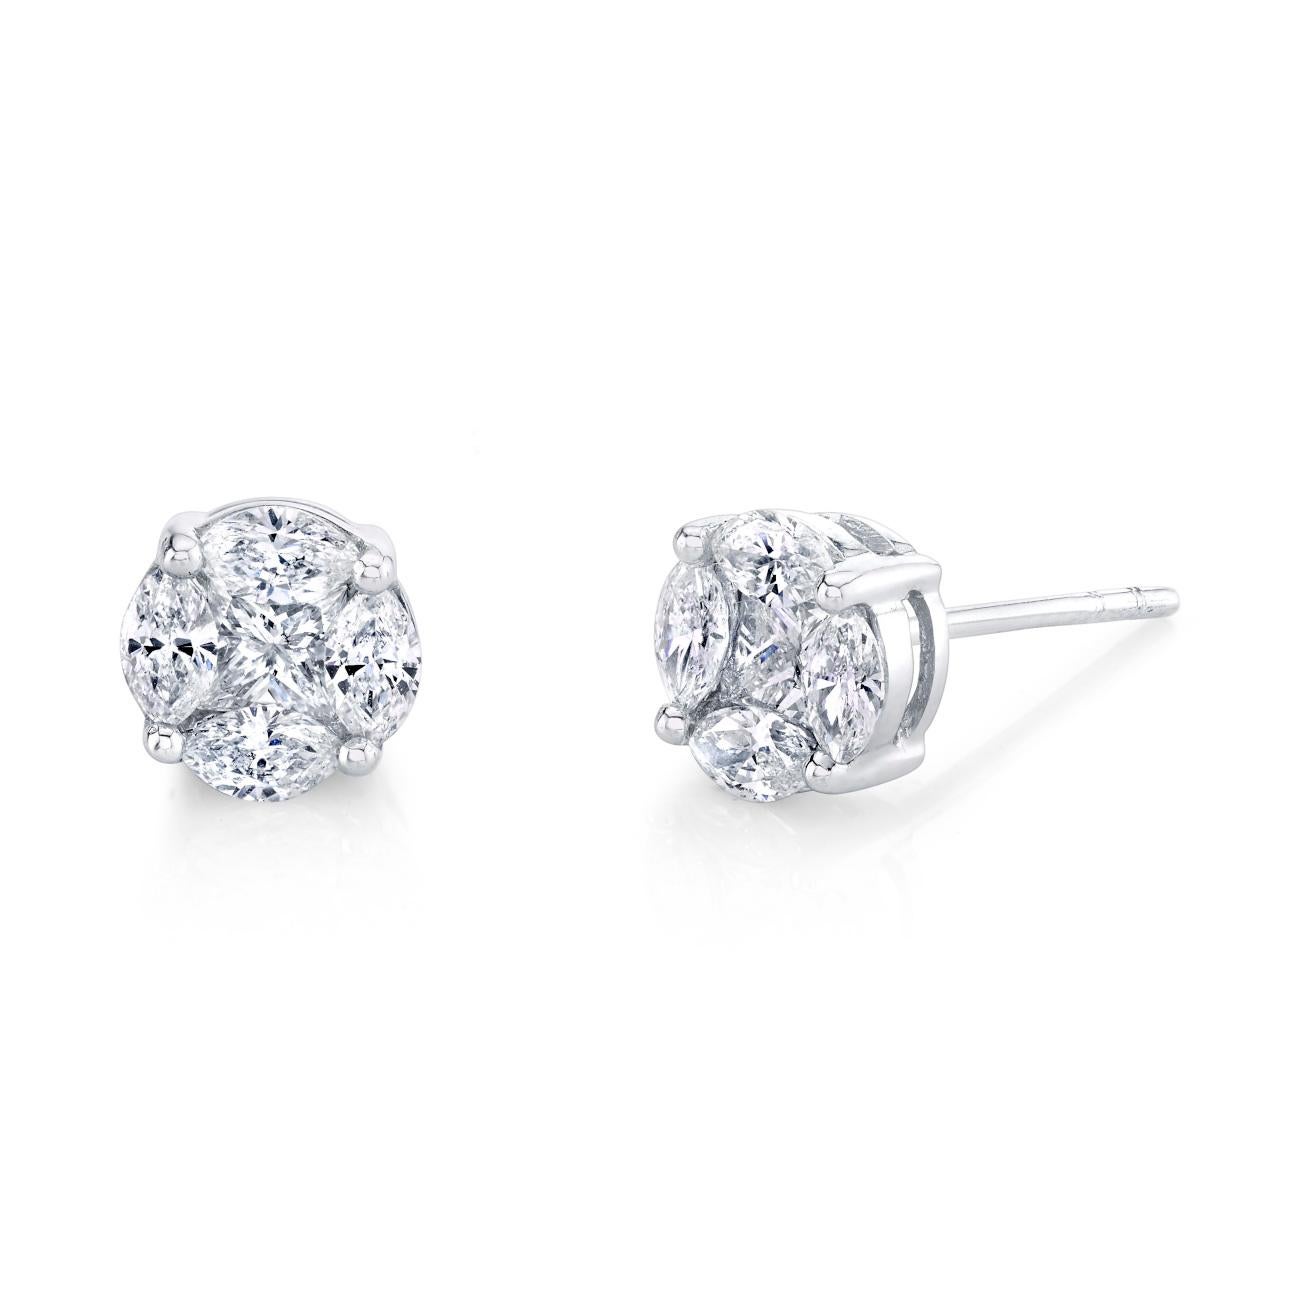 1.33 Carat T.W. Princess, Marquise Diamond, White Gold Illusion Stud Earrings For Sale 4